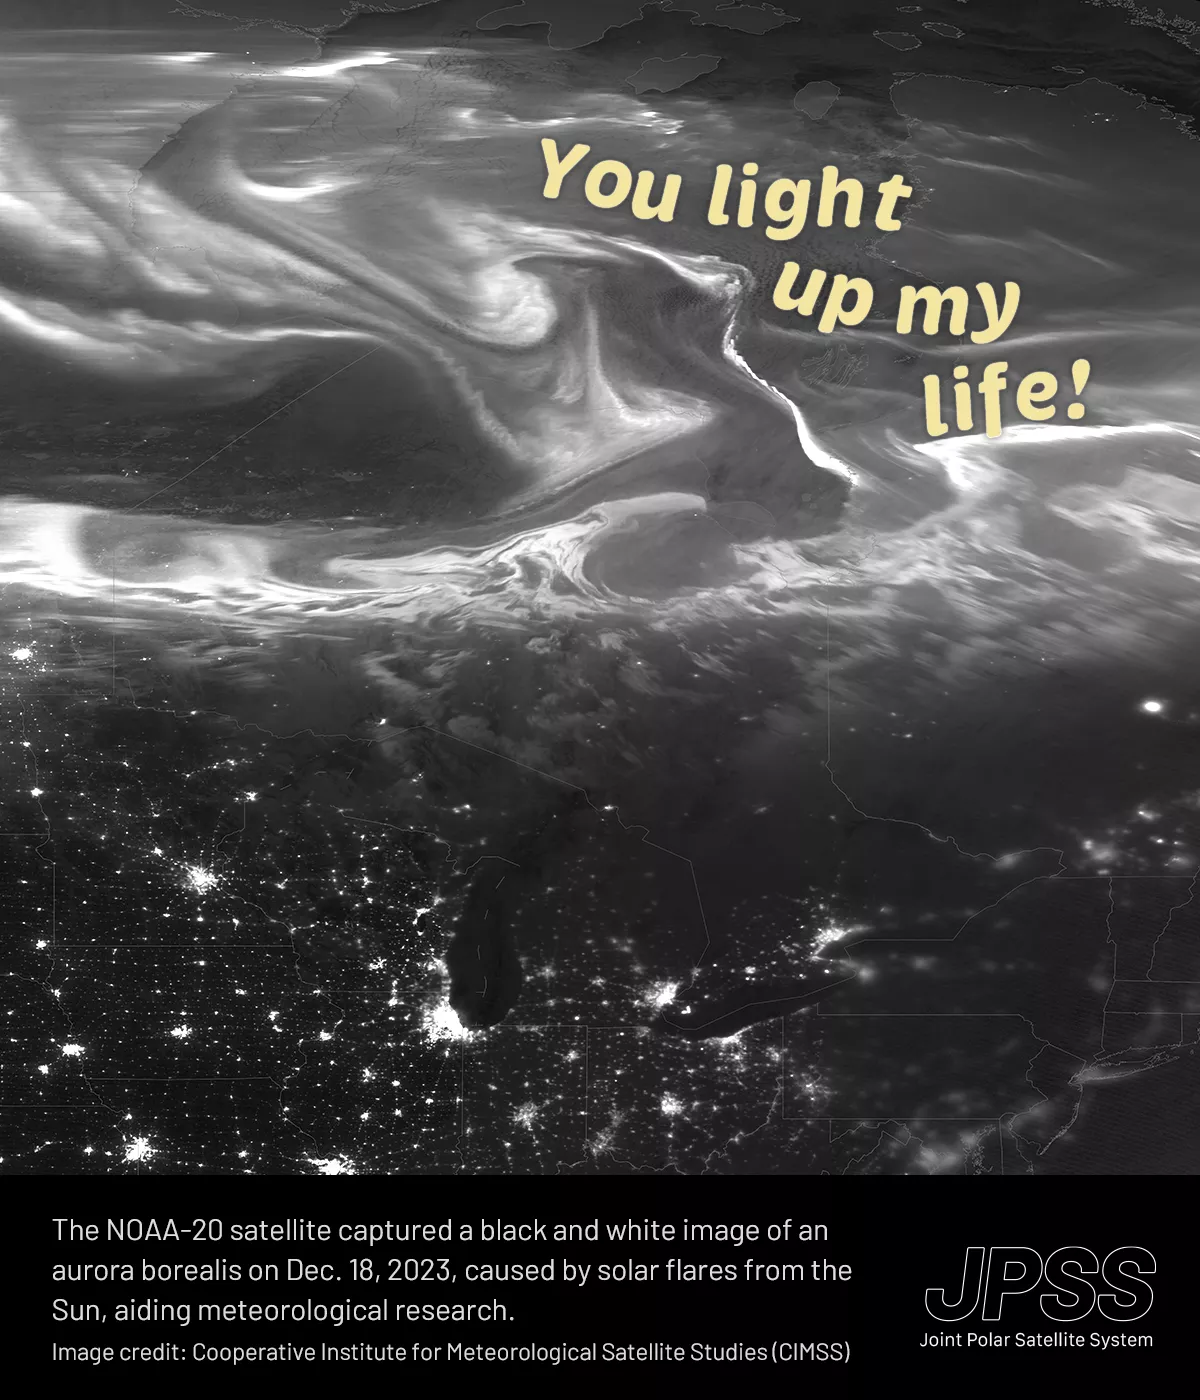 This Valentine's Day card features a black and white satellite image of part of the Northern Hemisphere, showcasing a dramatic natural light display of an aurora borealis. In the upper right-hand corner, playful script in light yellow states “You light up my life!” Beneath this phenomenon, the city lights of the United States can be seen as intricate networks of glowing dots. At the bottom of the card, there's a caption that reads, “The NOAA-20 satellite captured a black and white image of an aurora boreali